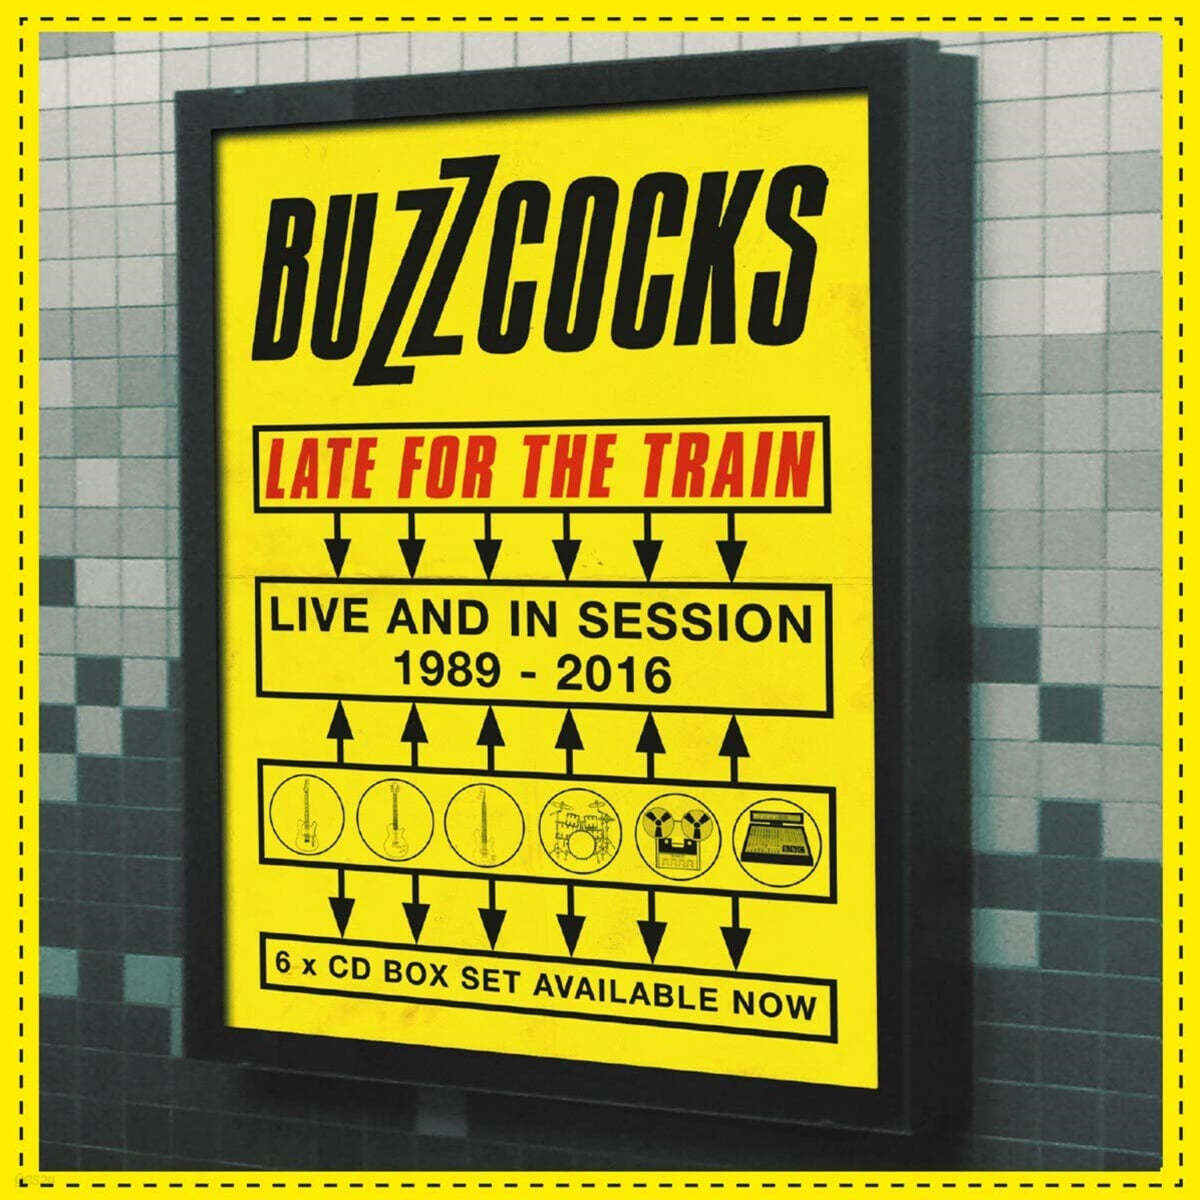 Buzzcocks (버즈콕스) - Late For The Train (Live And In Session 1989 - 2016) 